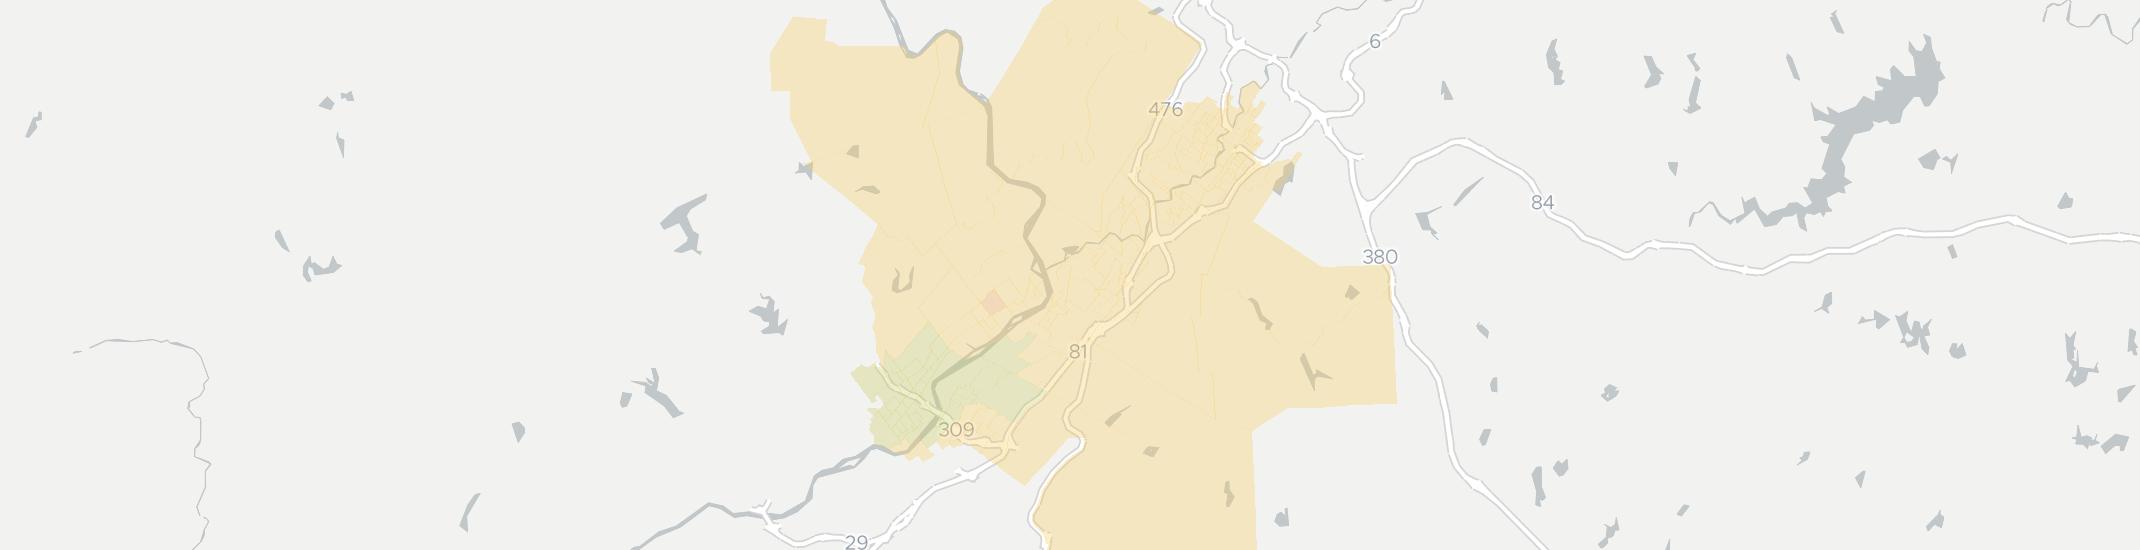 Pittston Internet Competition Map. Click for interactive map.